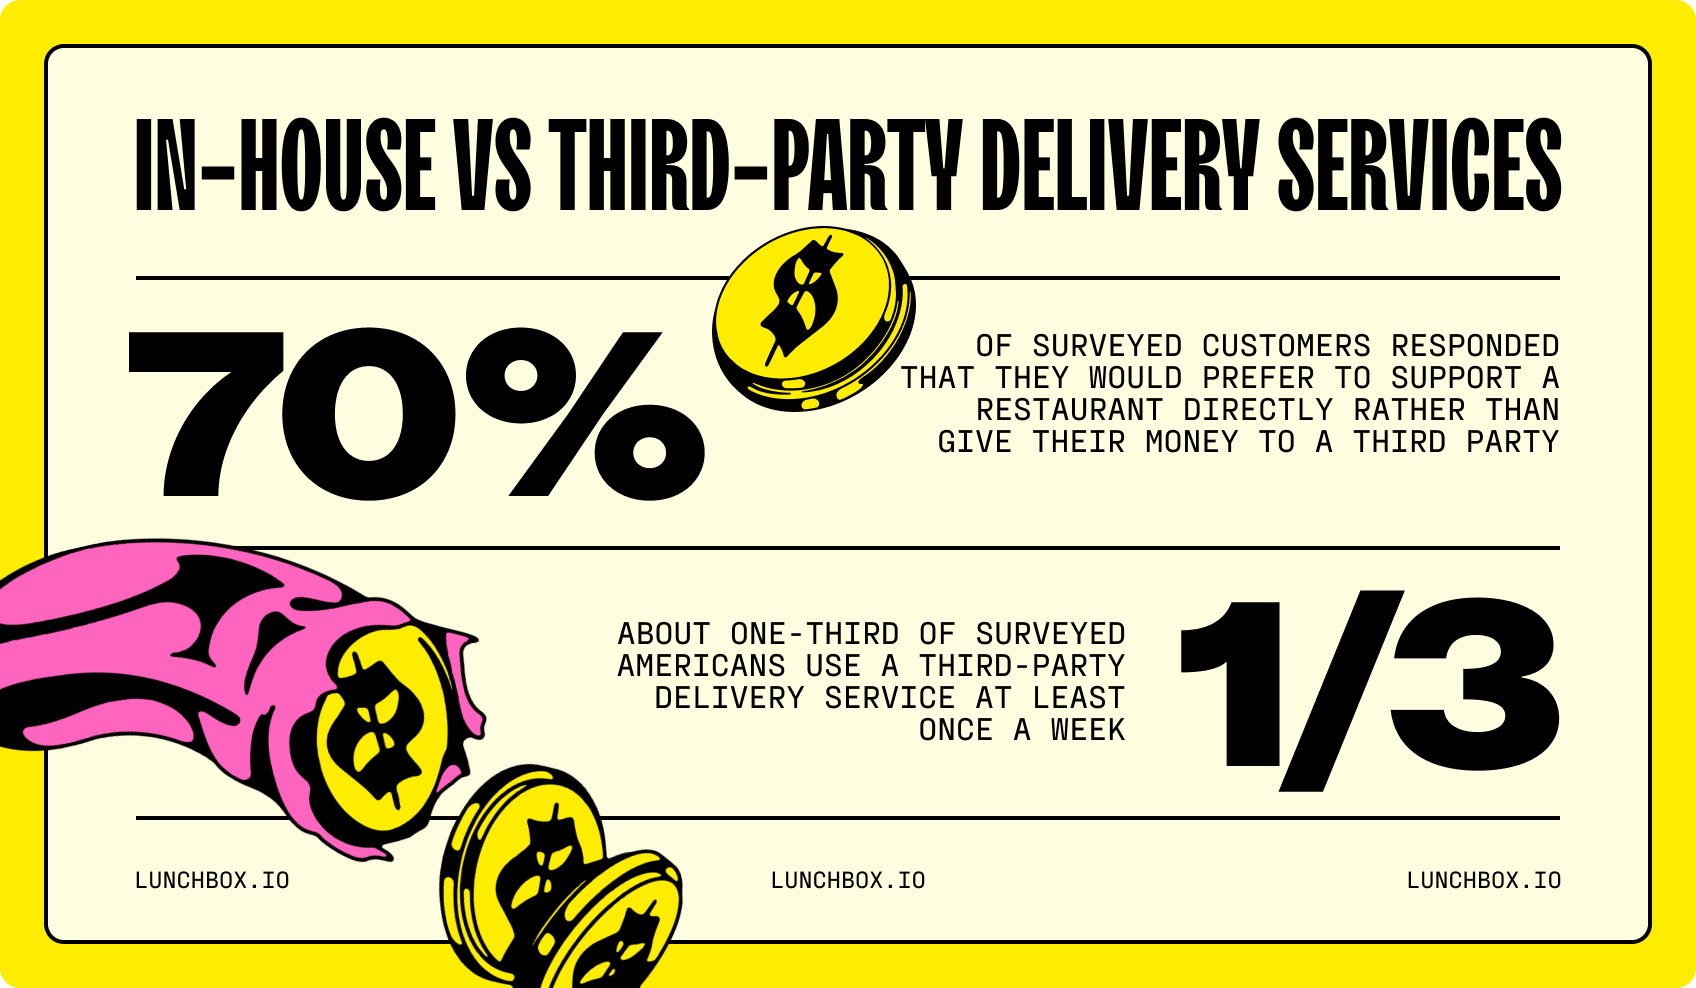 About one-third of surveyed Americans use a third-party delivery service at least once a week. That being said, customers want to support their local restaurants. 70 percent of surveyed customers responded that they would prefer to support a restaurant directly rather than give their money to a third party.